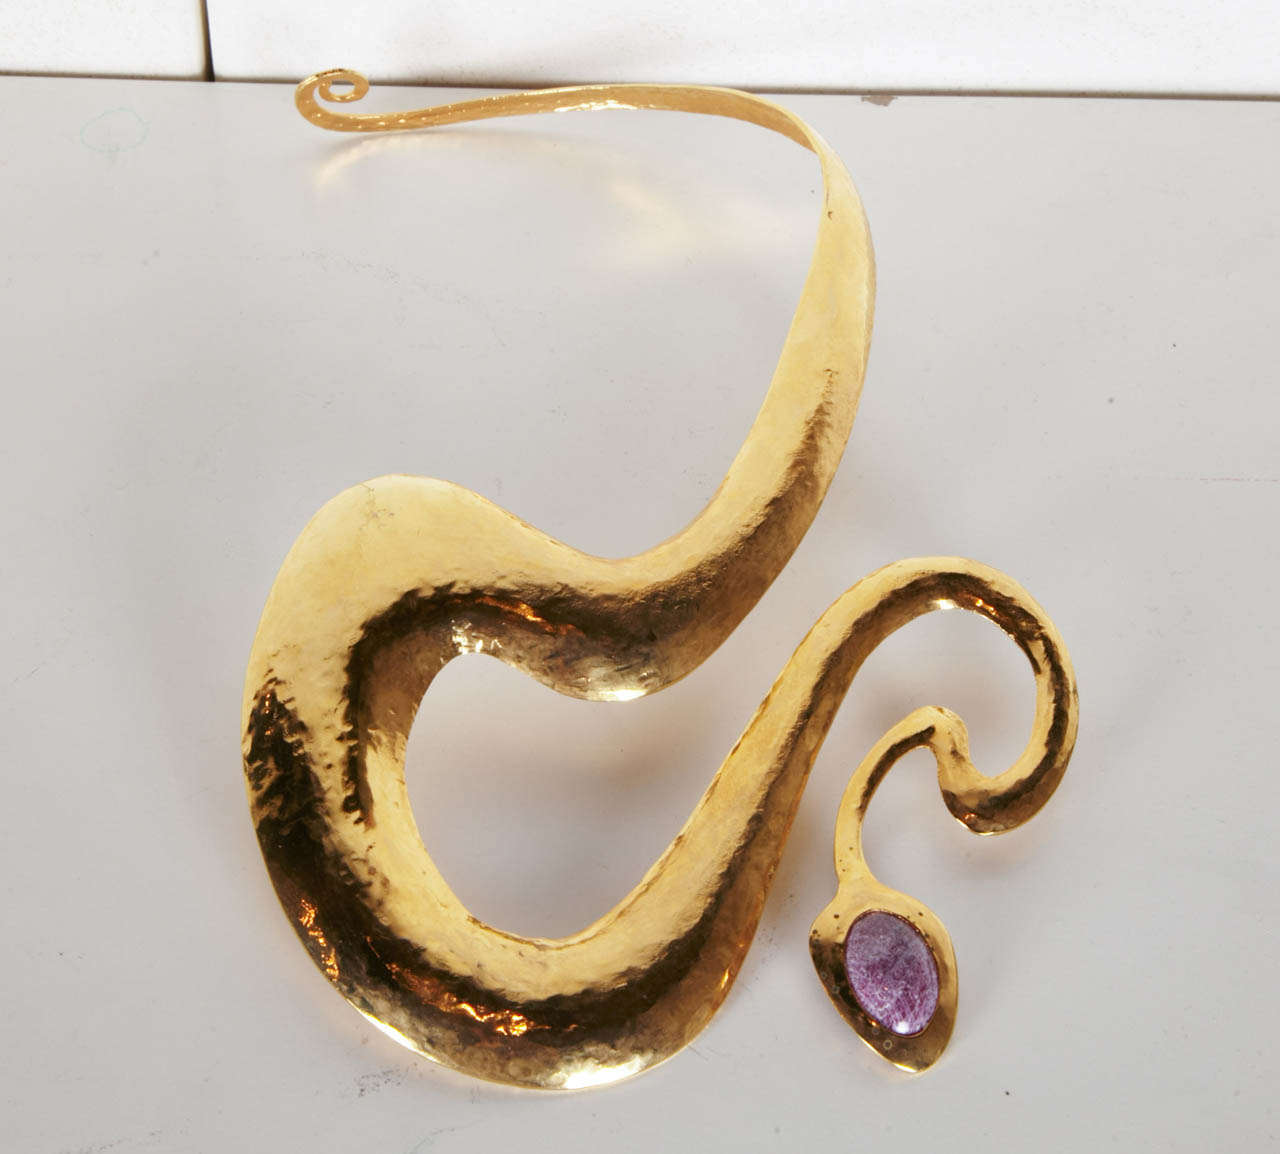 Important sculpture necklace in gold hammered metal, representing a snake, the head is decorated with a violet jasper.
Signed and numbered 1/4 EA (Artist proof)
Certificate.